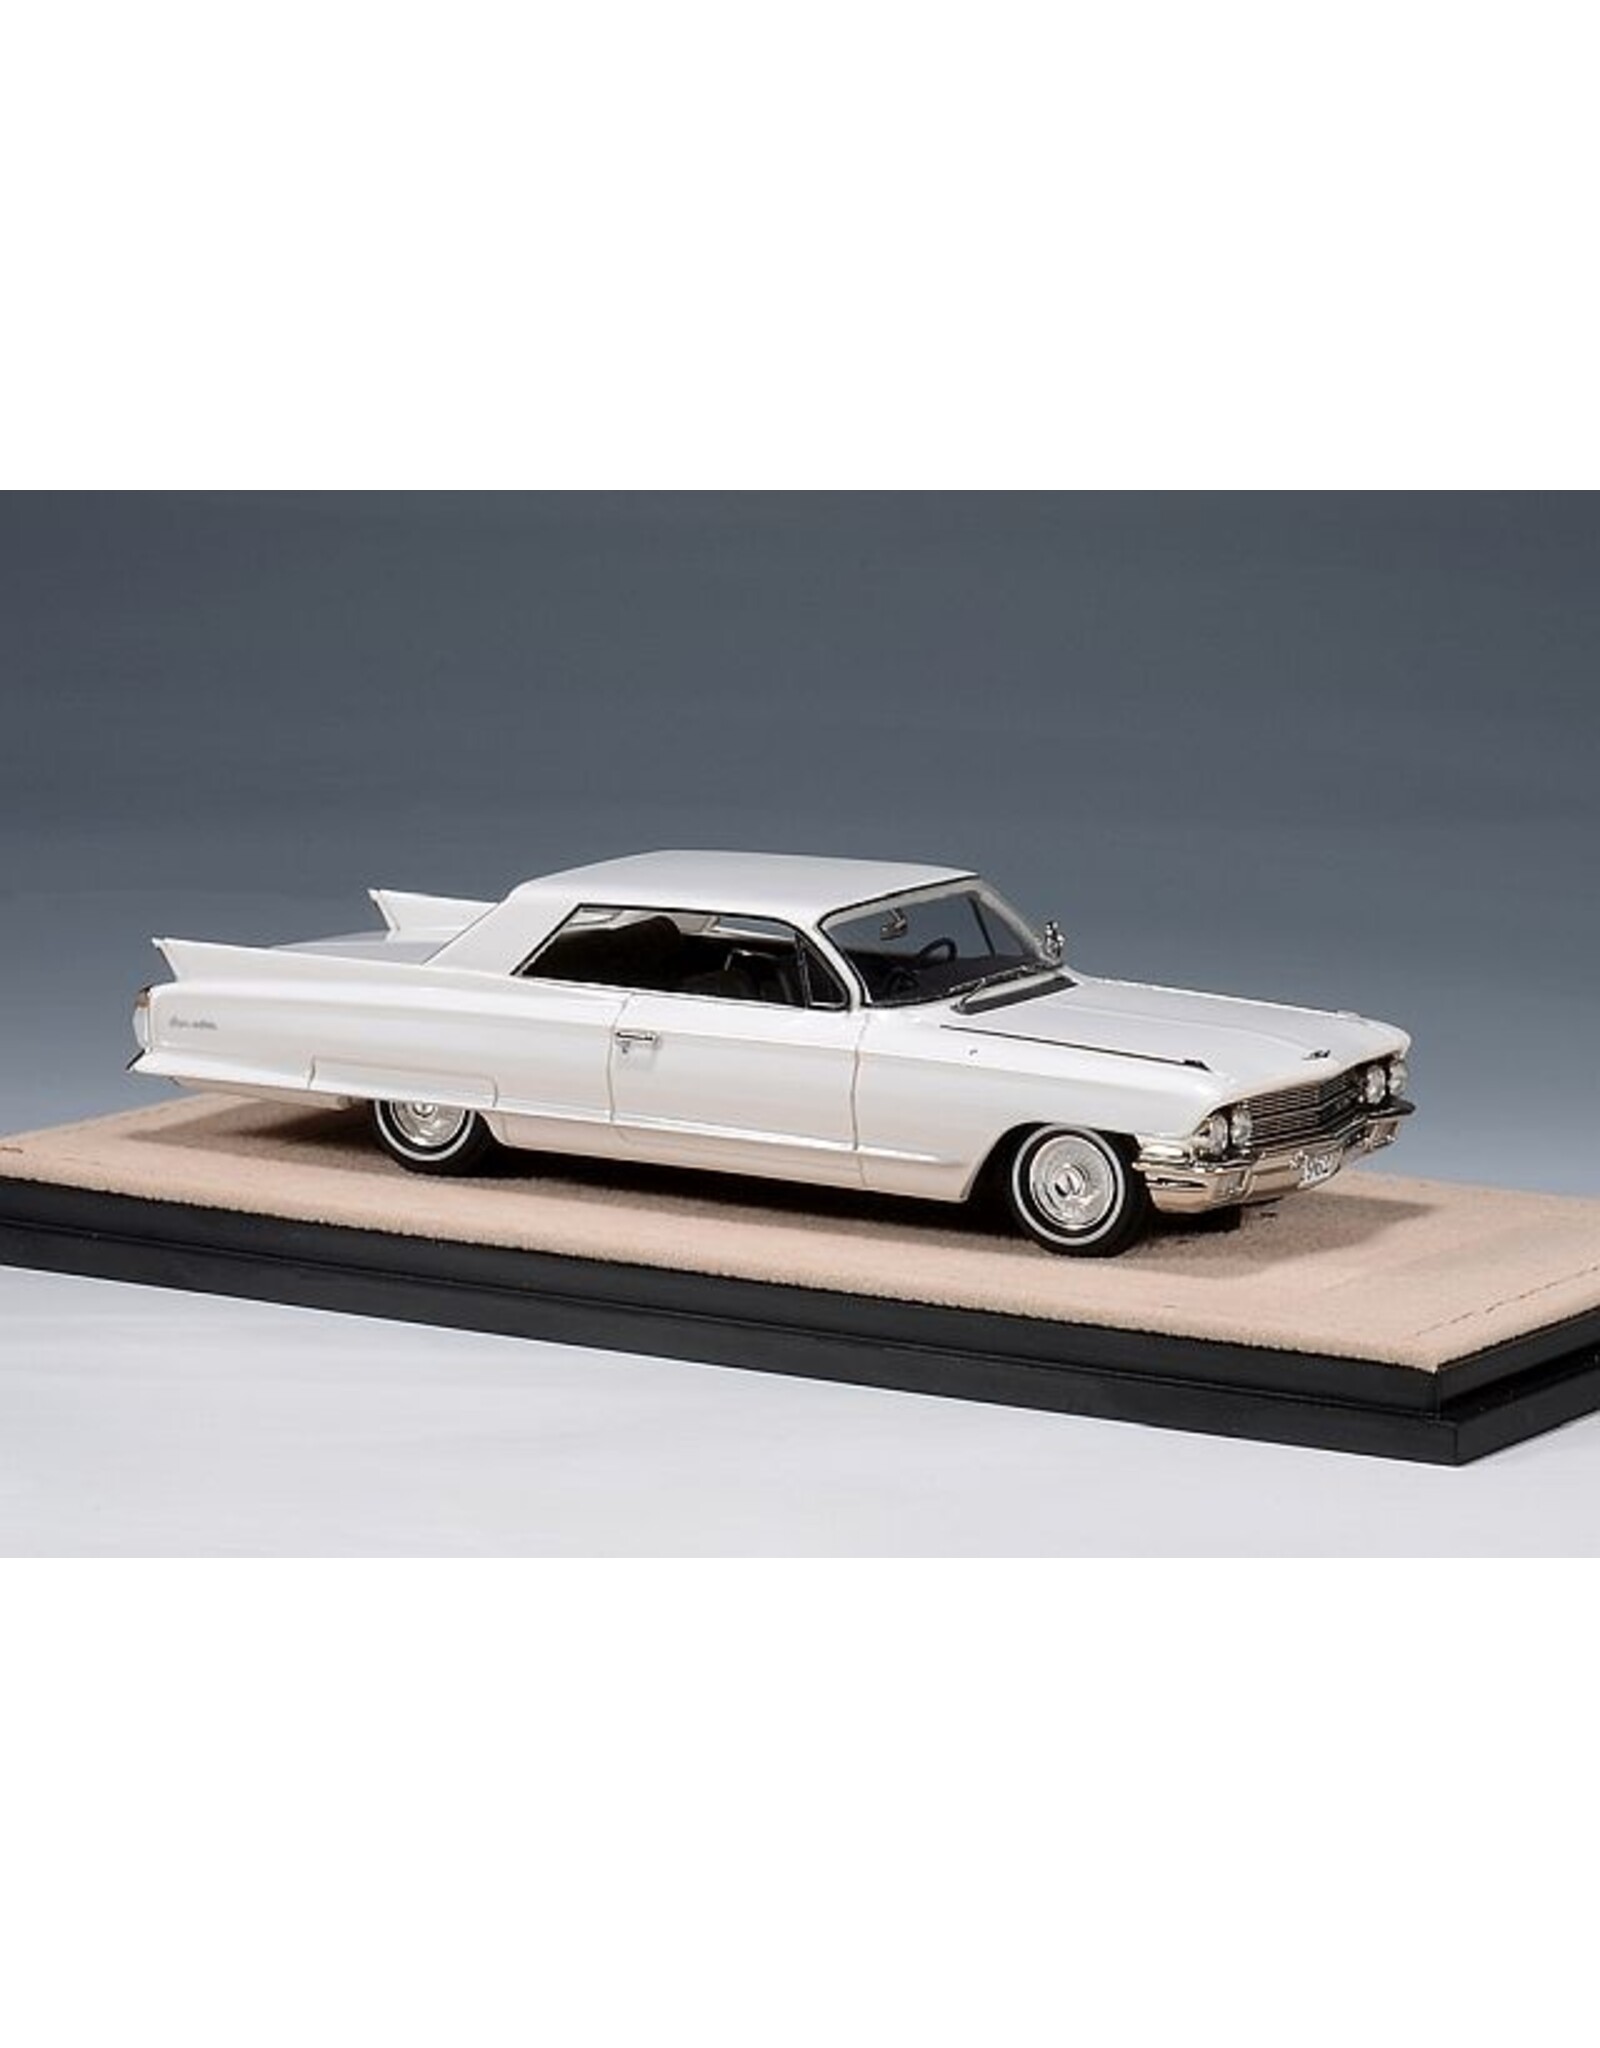 Cadillac(General Motors) Cadillac Coupe de Ville(1962)Olympic white